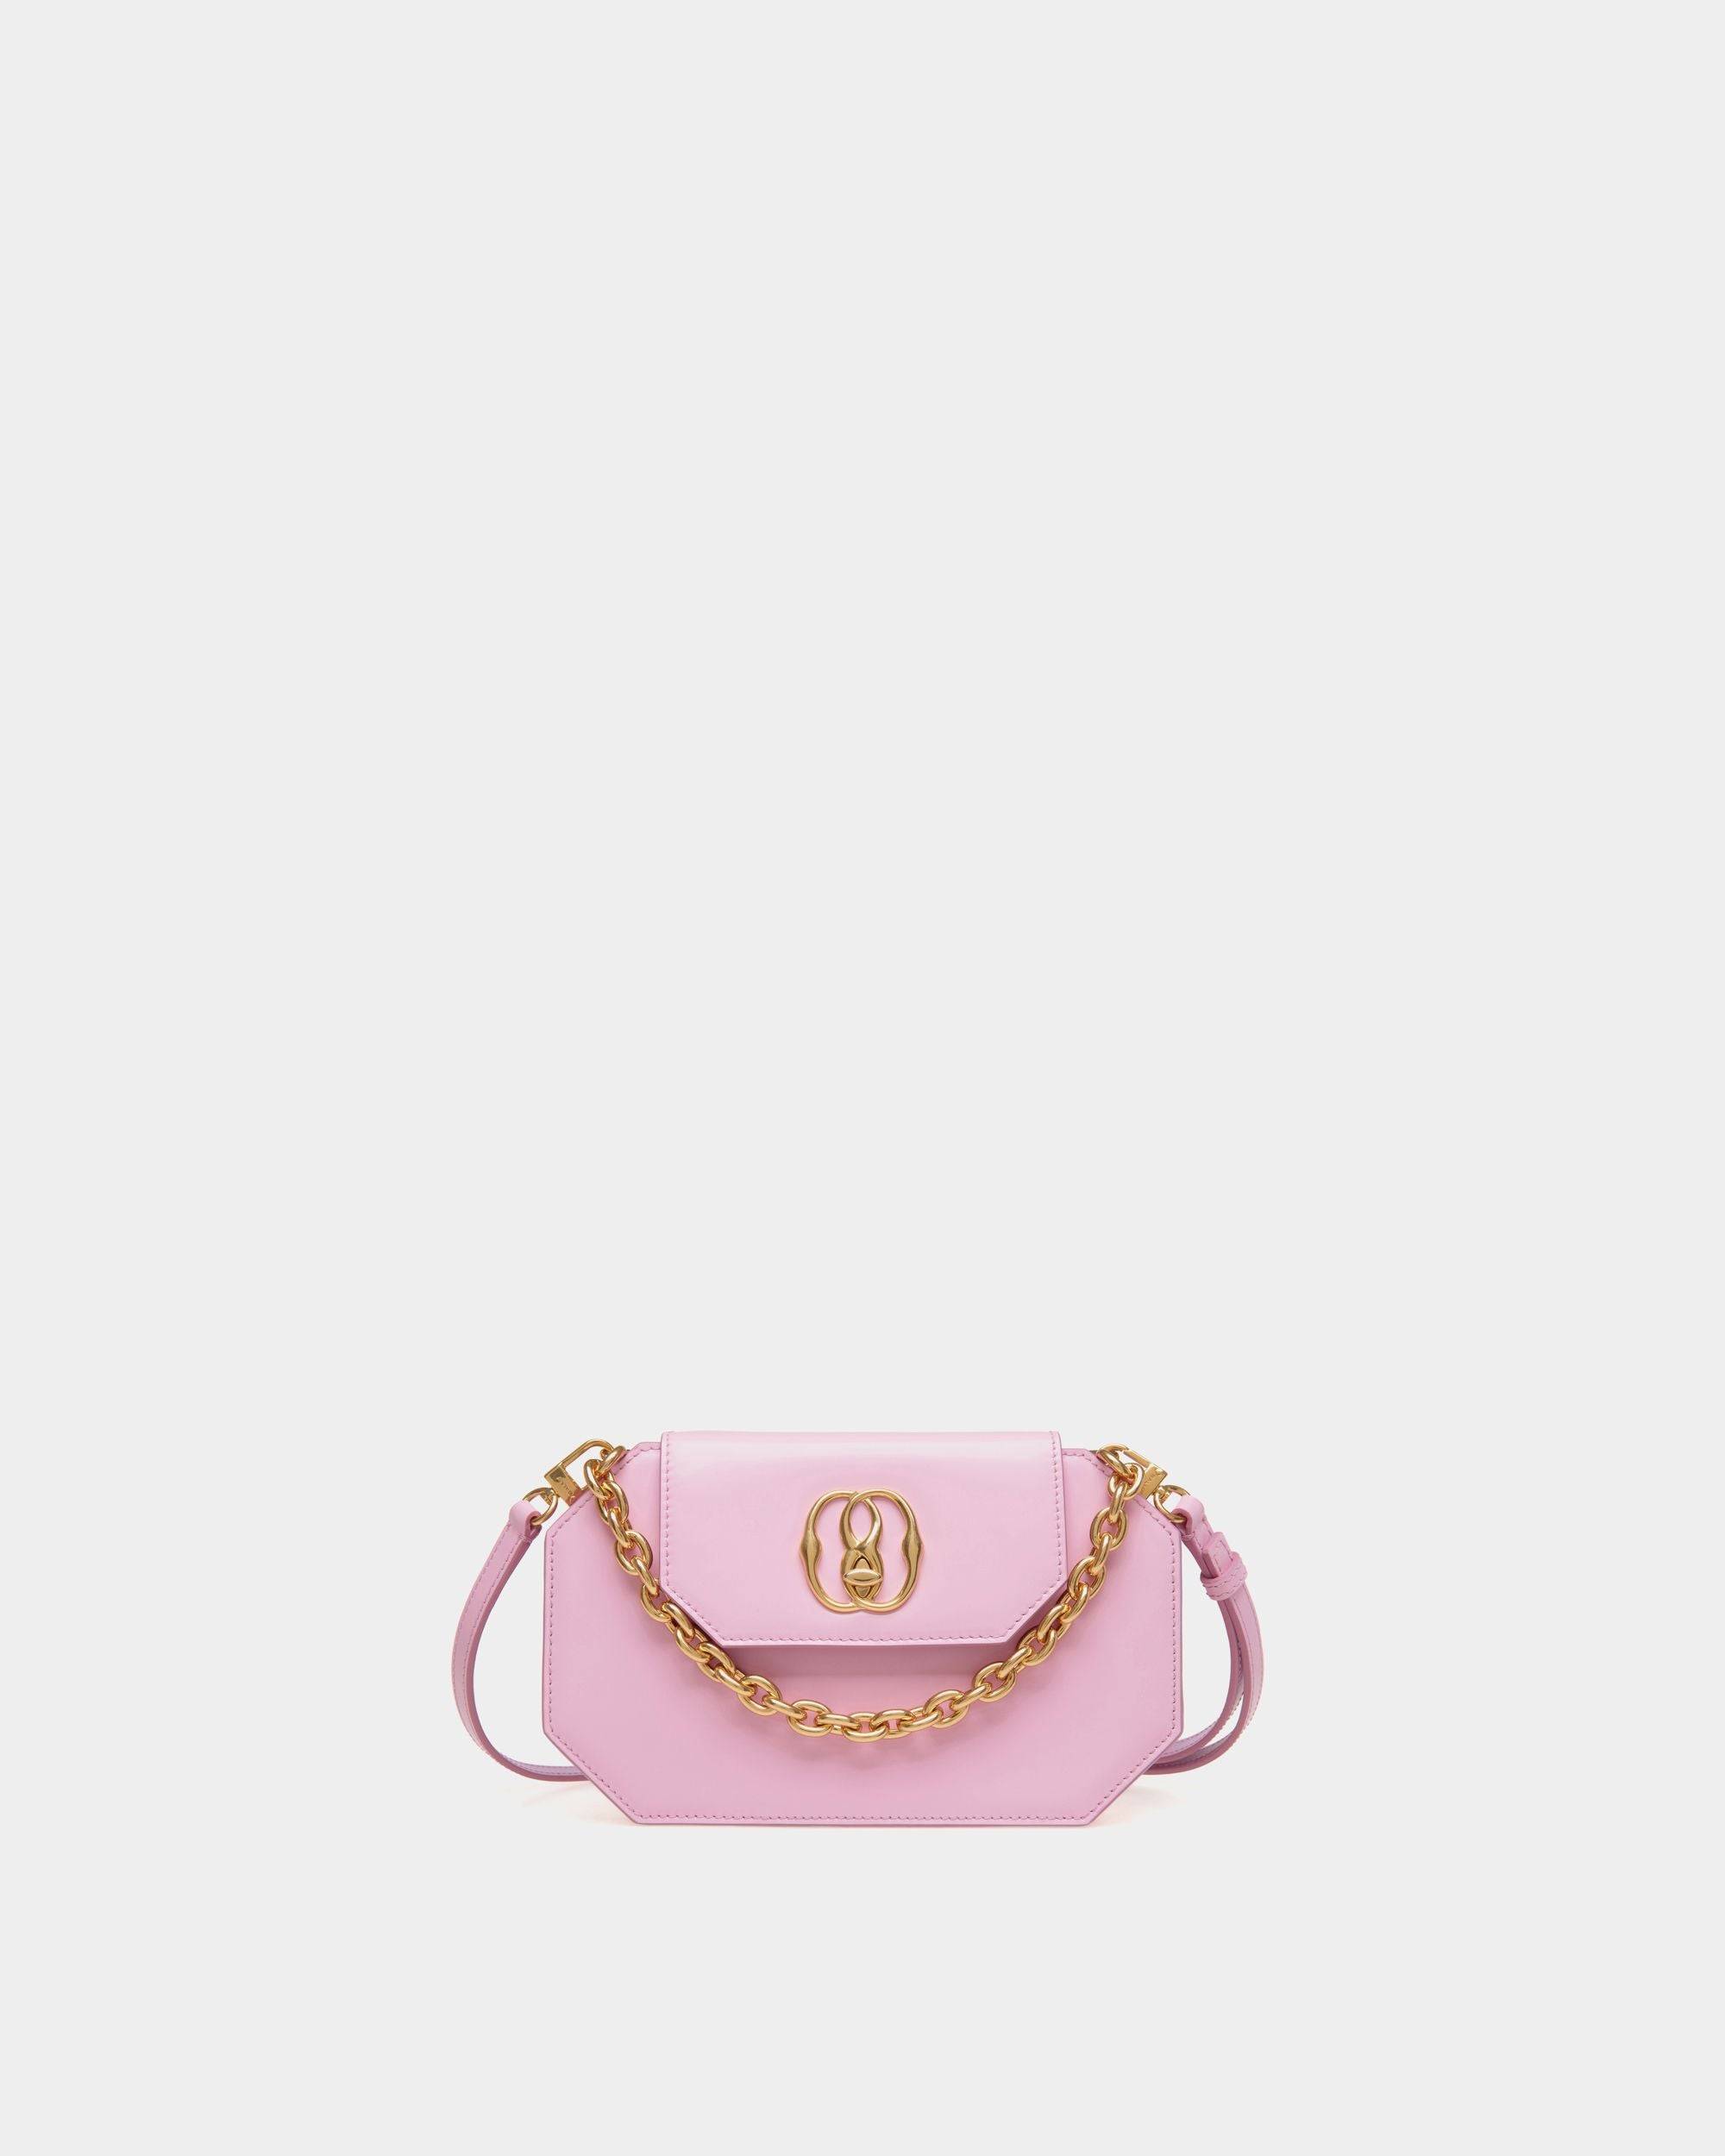 Women's Emblem Mini Bag in Pink Patent Leather | Bally | Still Life Front